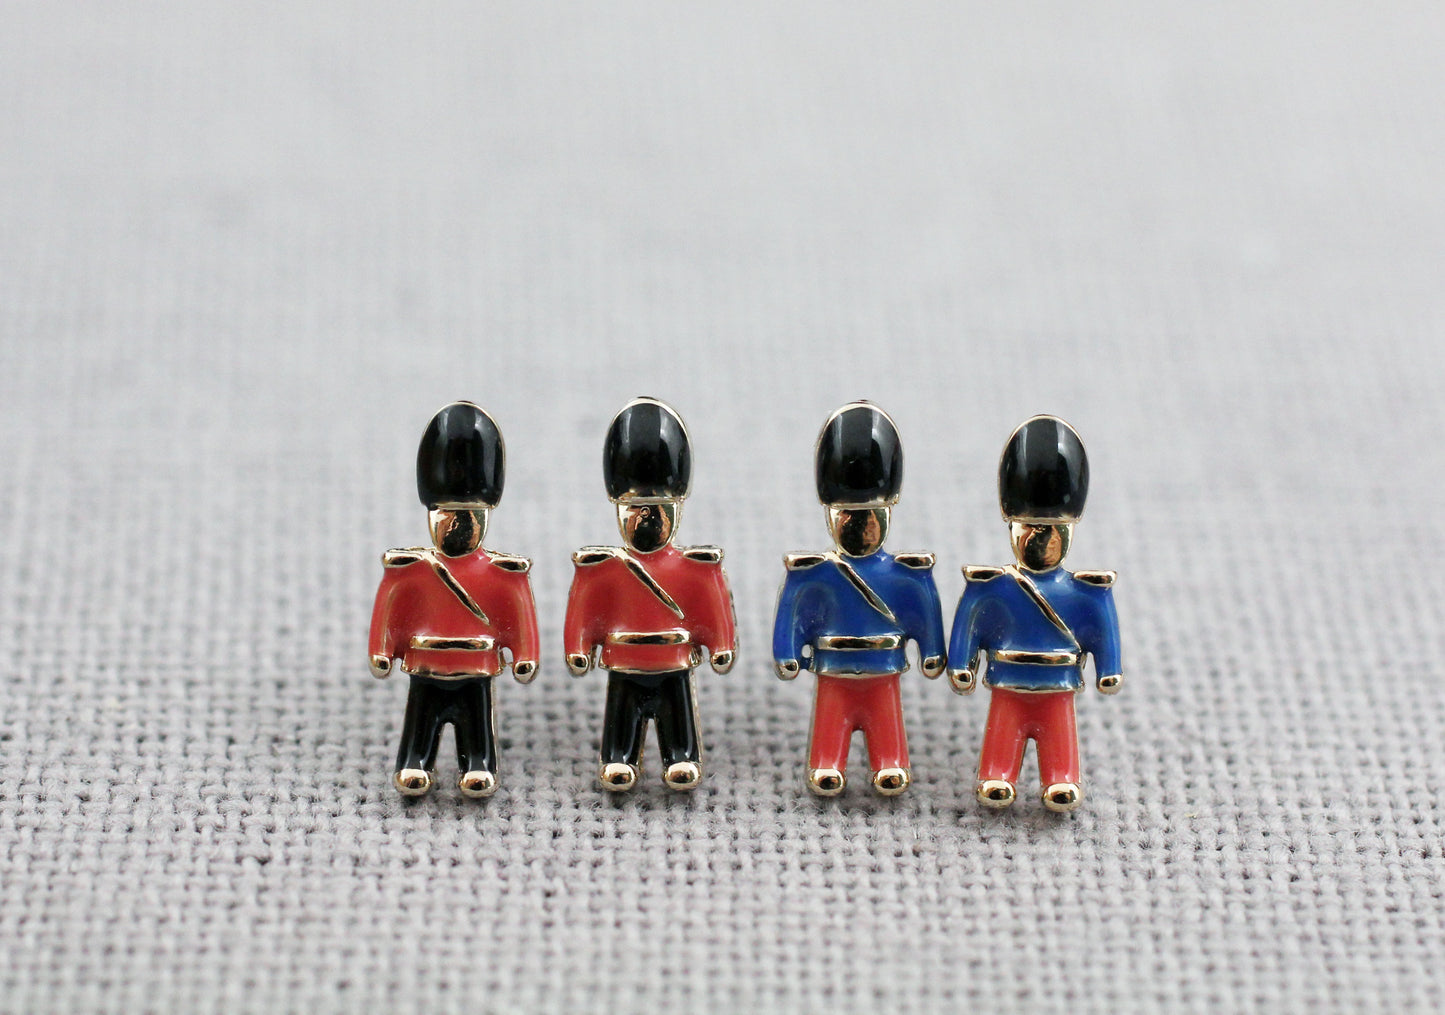 Tiny royal soldier earrings, Toy Soldier Earrings, Nutcracker earrings, Nutcracker Ballet